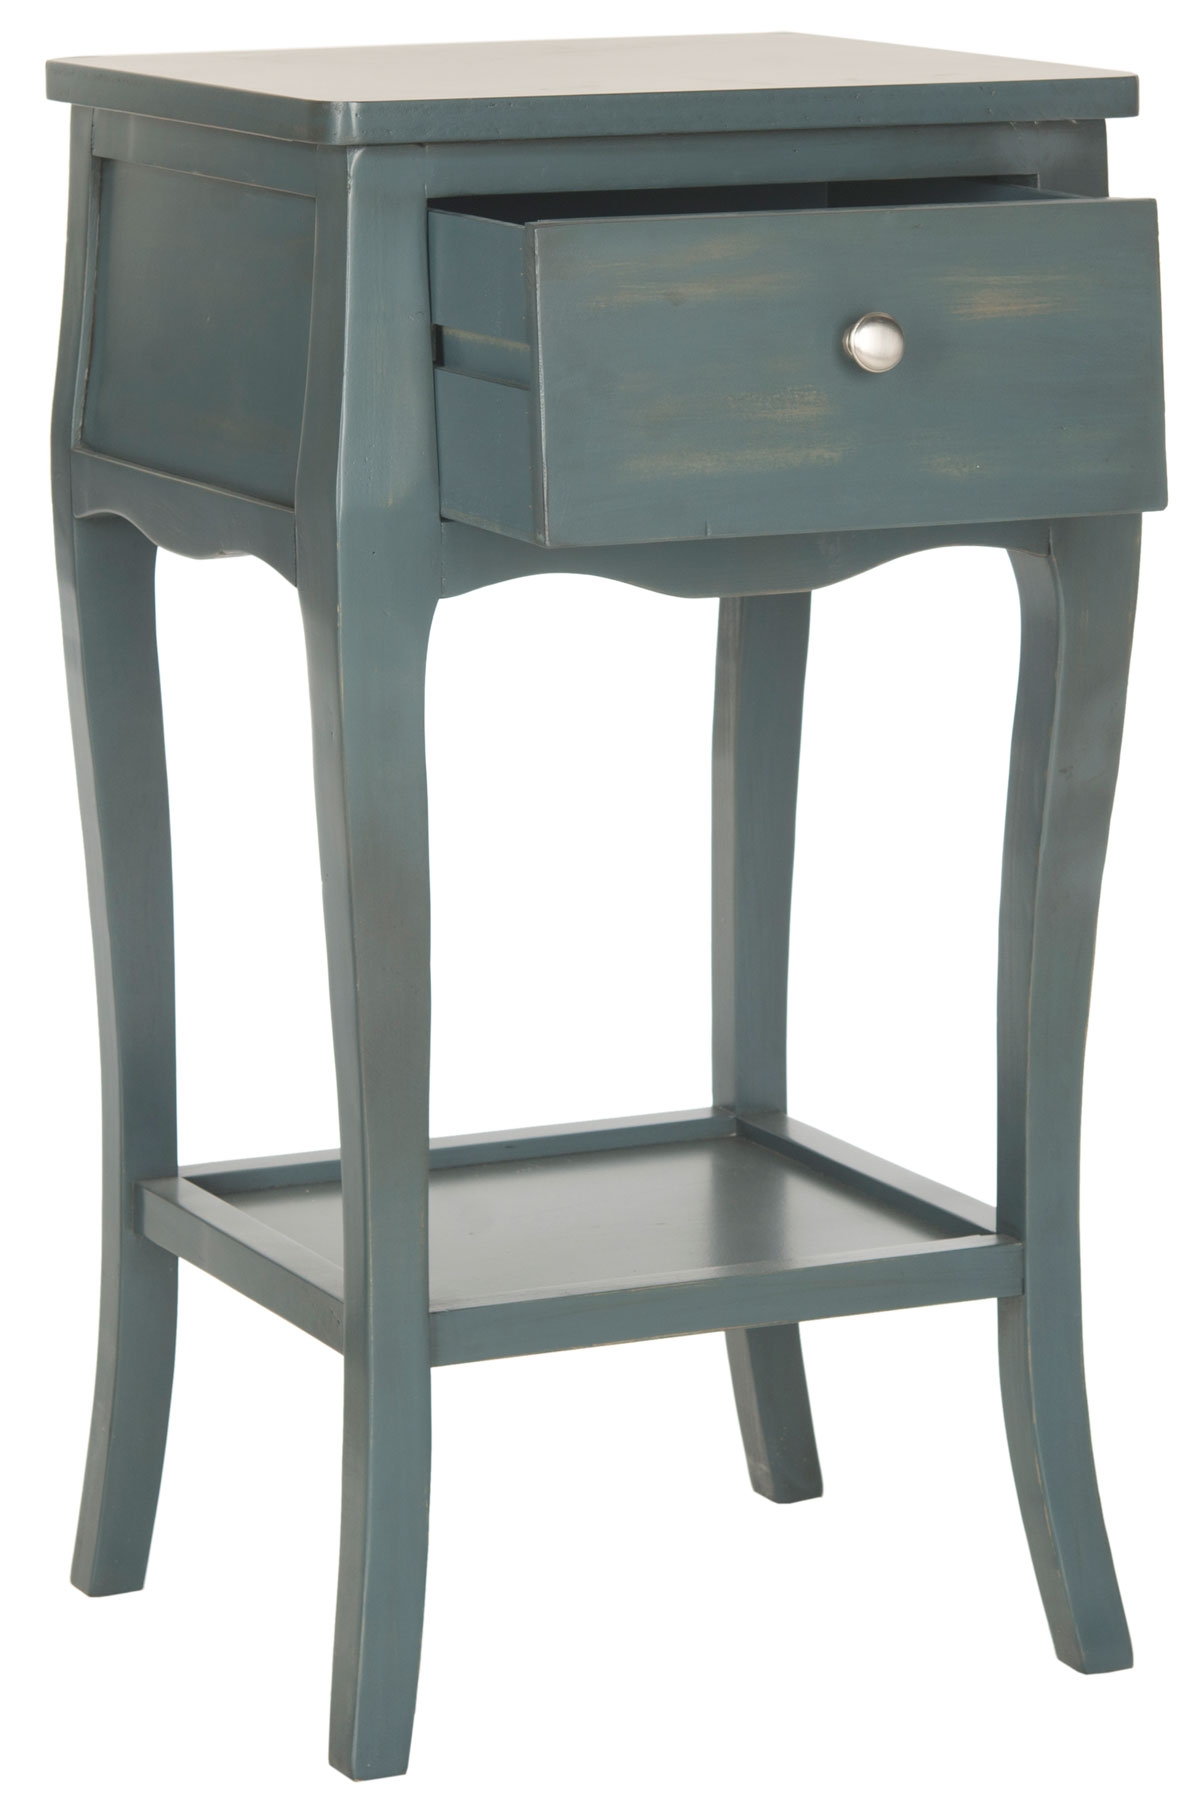 Thelma End Table With Storage Drawer - Steel Teal - Arlo Home - Image 3